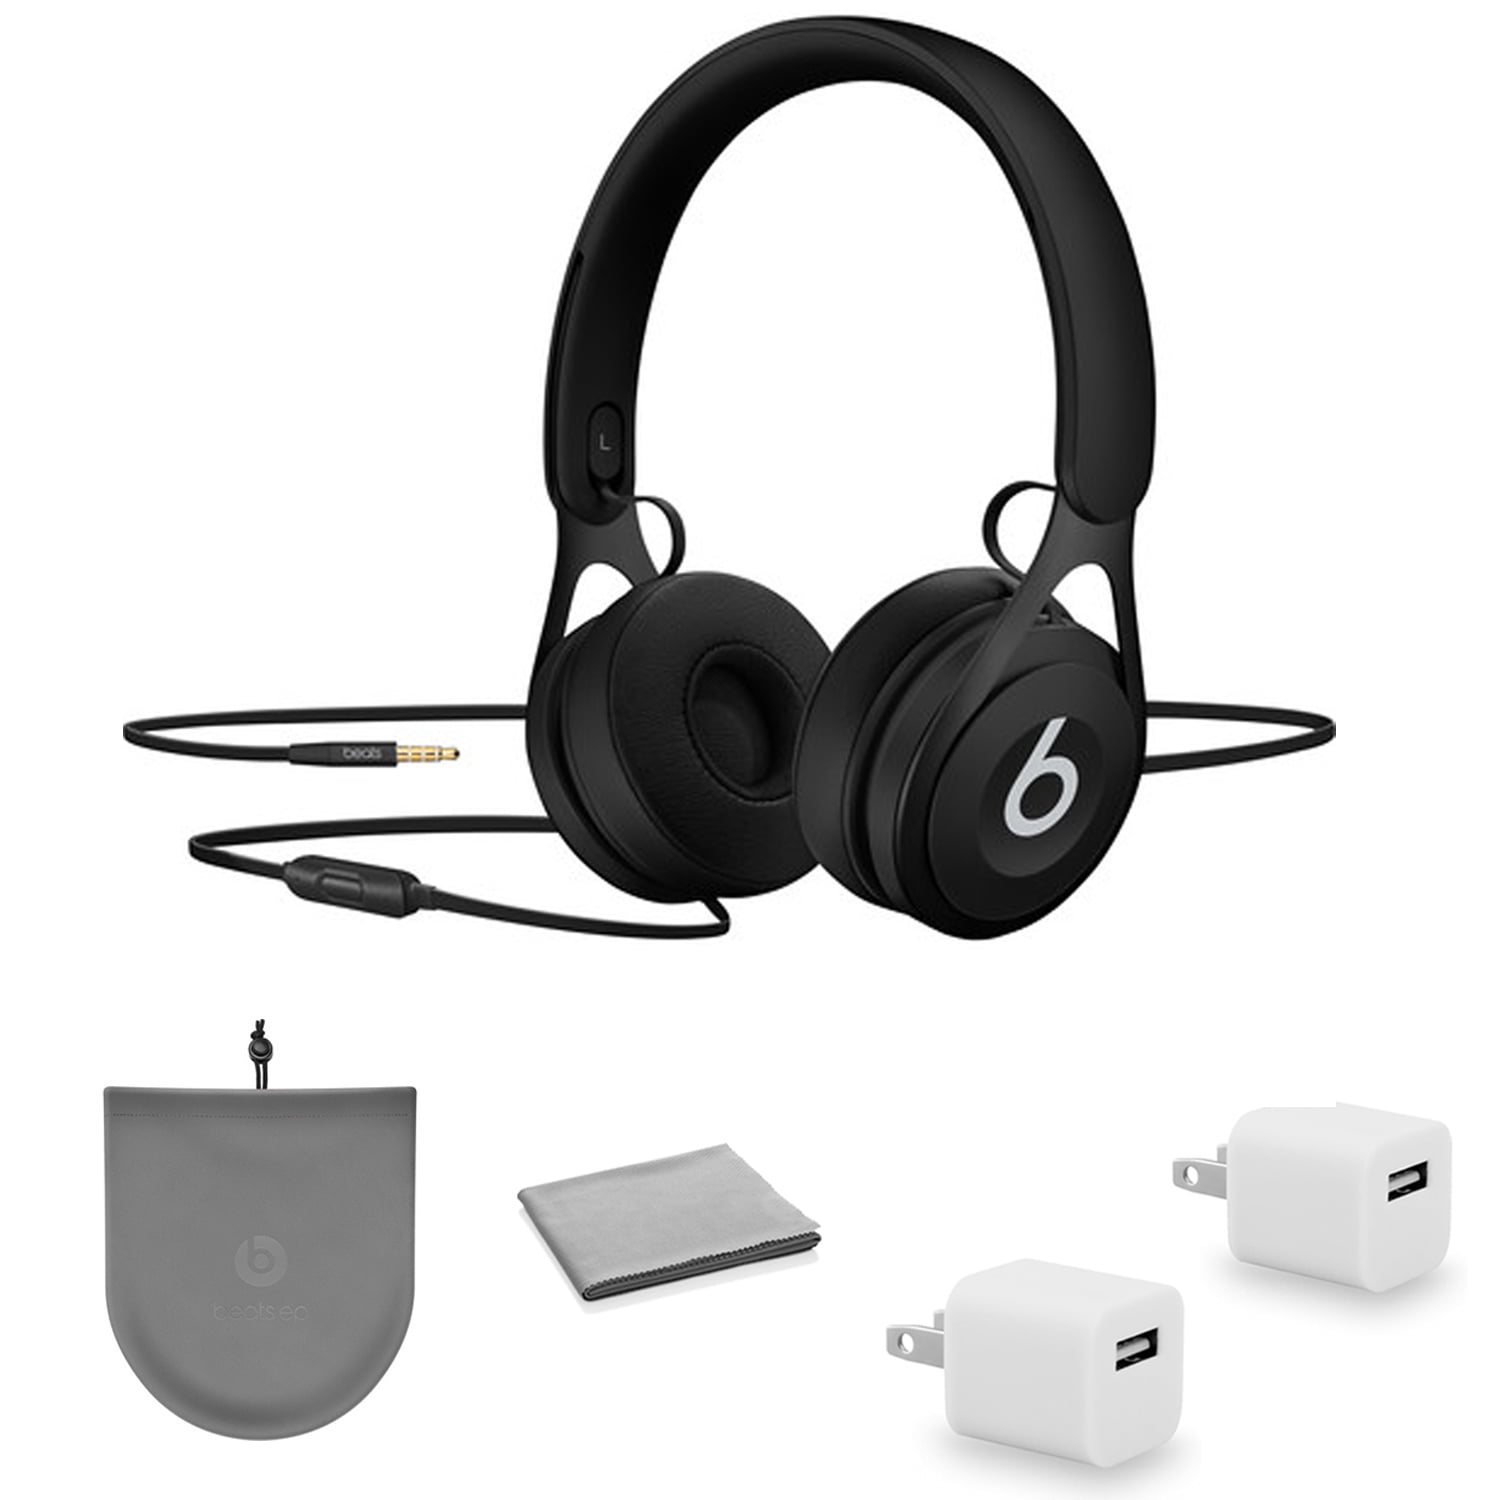 Beats by Dr. Dre EP On-Ear Headphones (Black) ML992LL/A Kit with USB Adapter Cube - Walmart.com